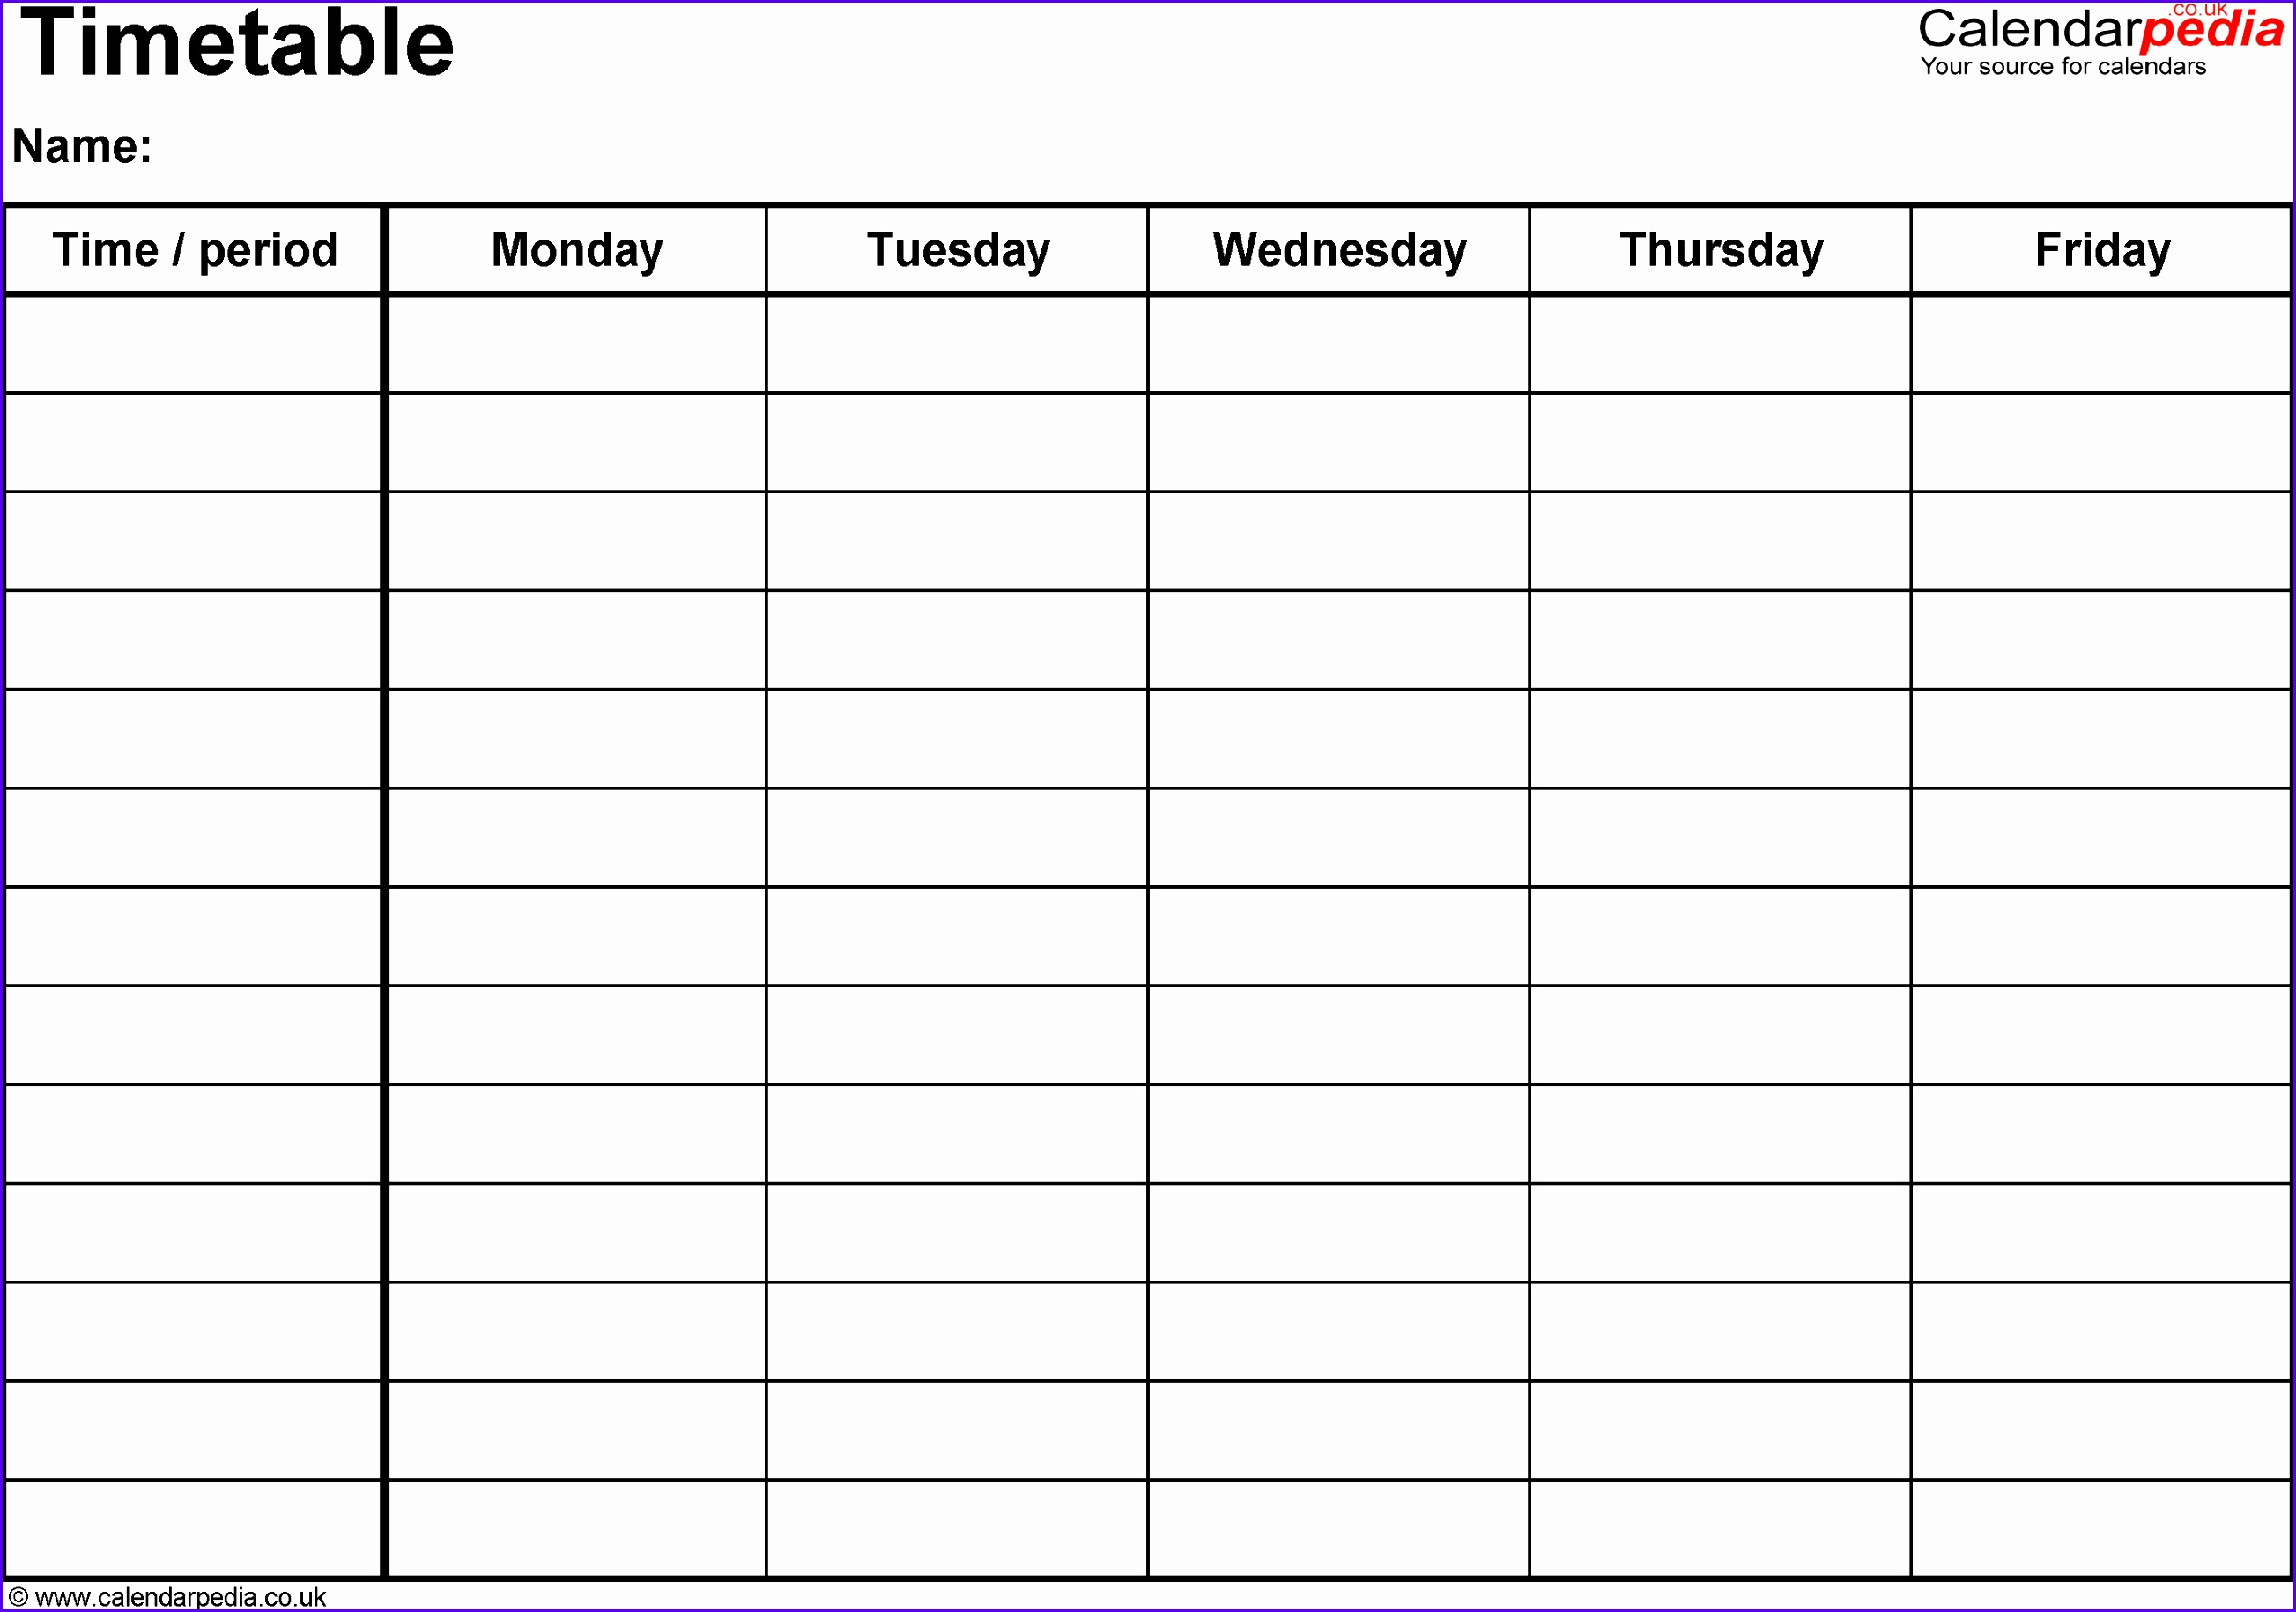 timetable sample excel 26061830